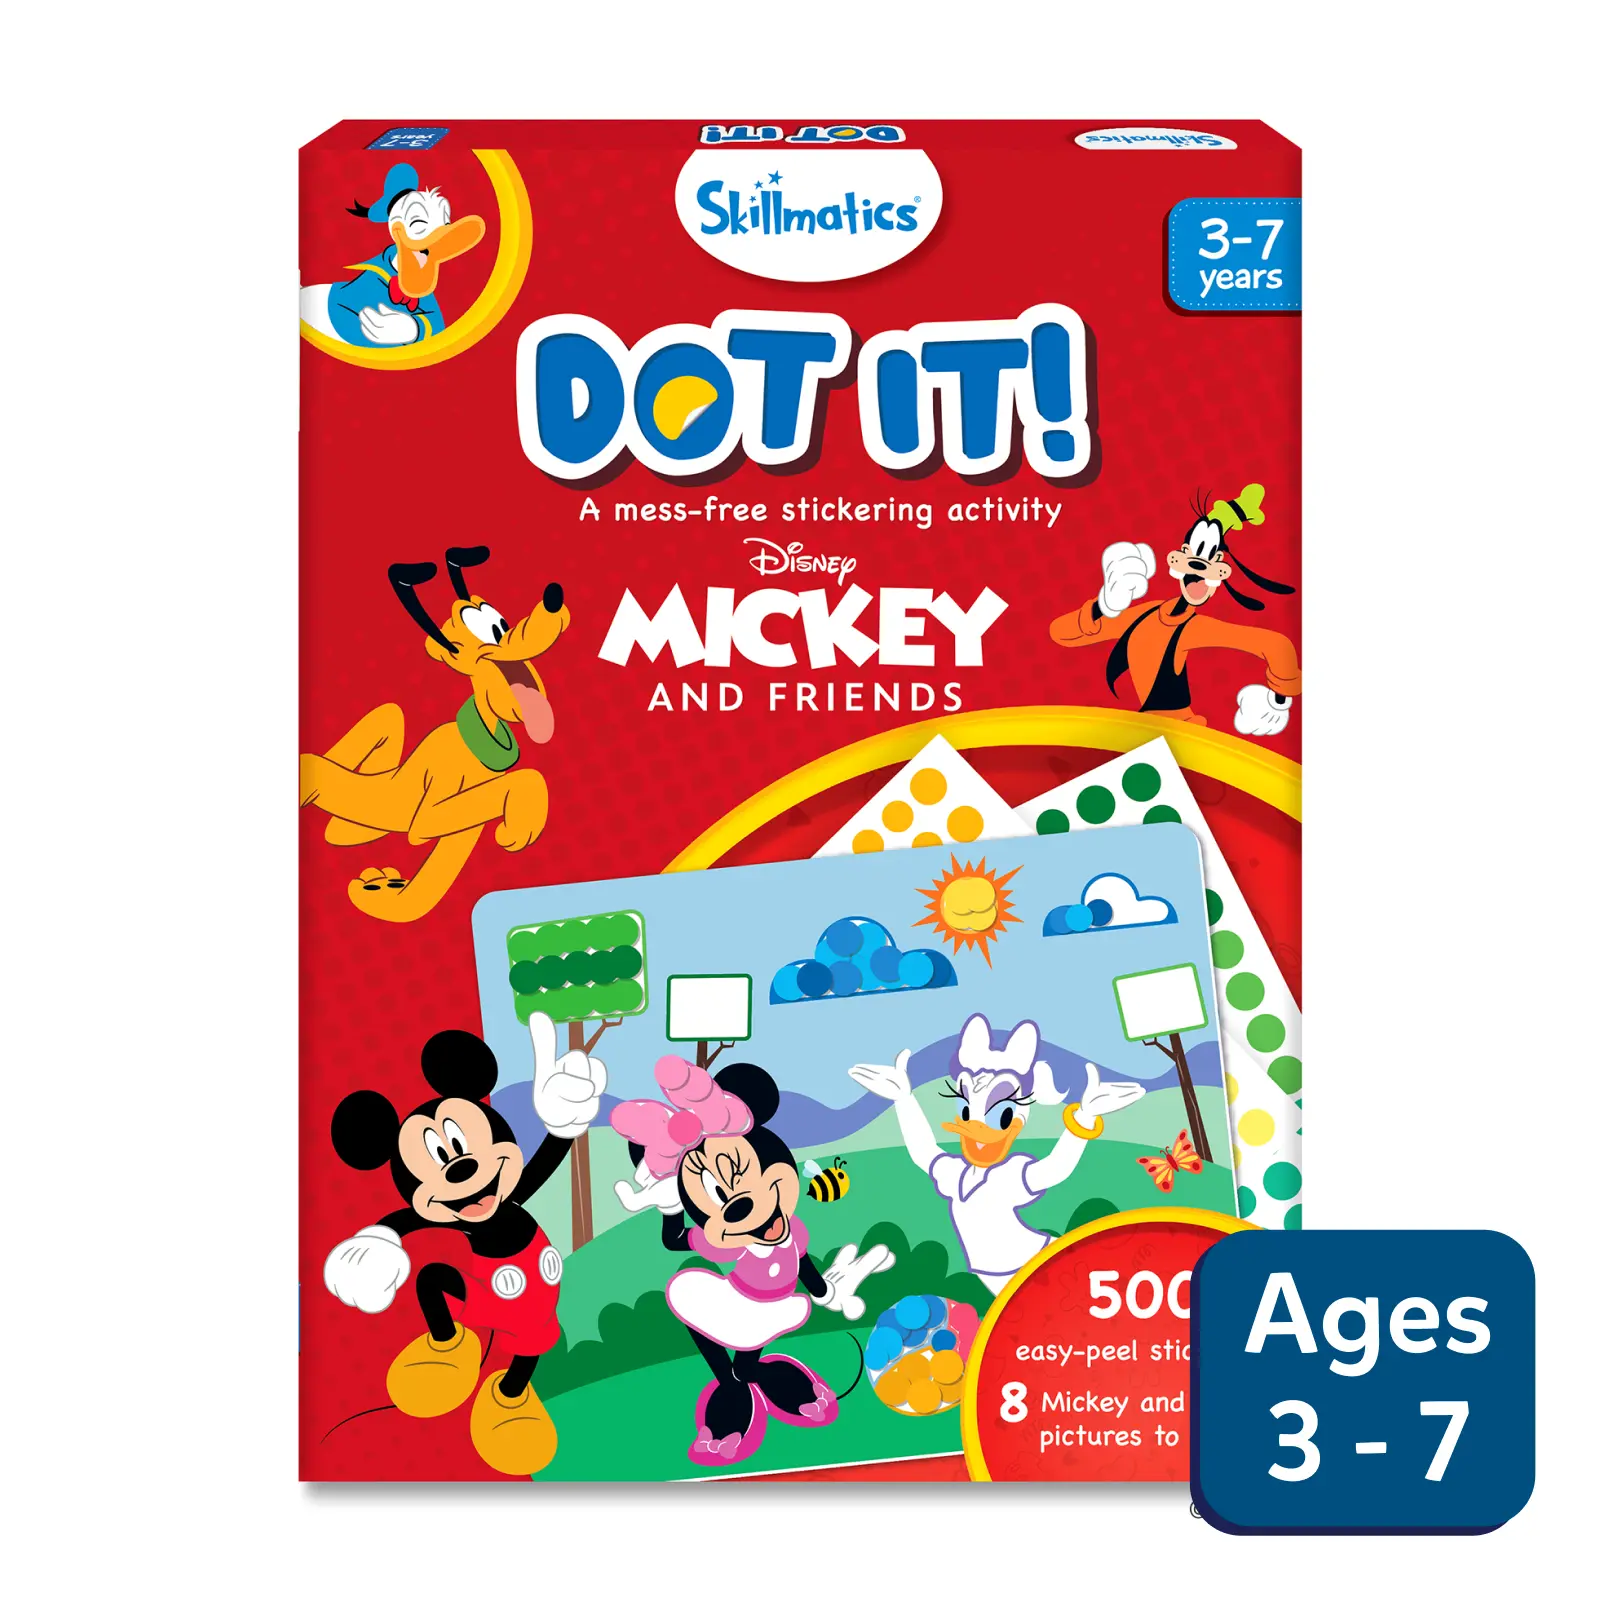 Dot it - Mickey And Friends | No Mess Sticker Art (ages 3-7)